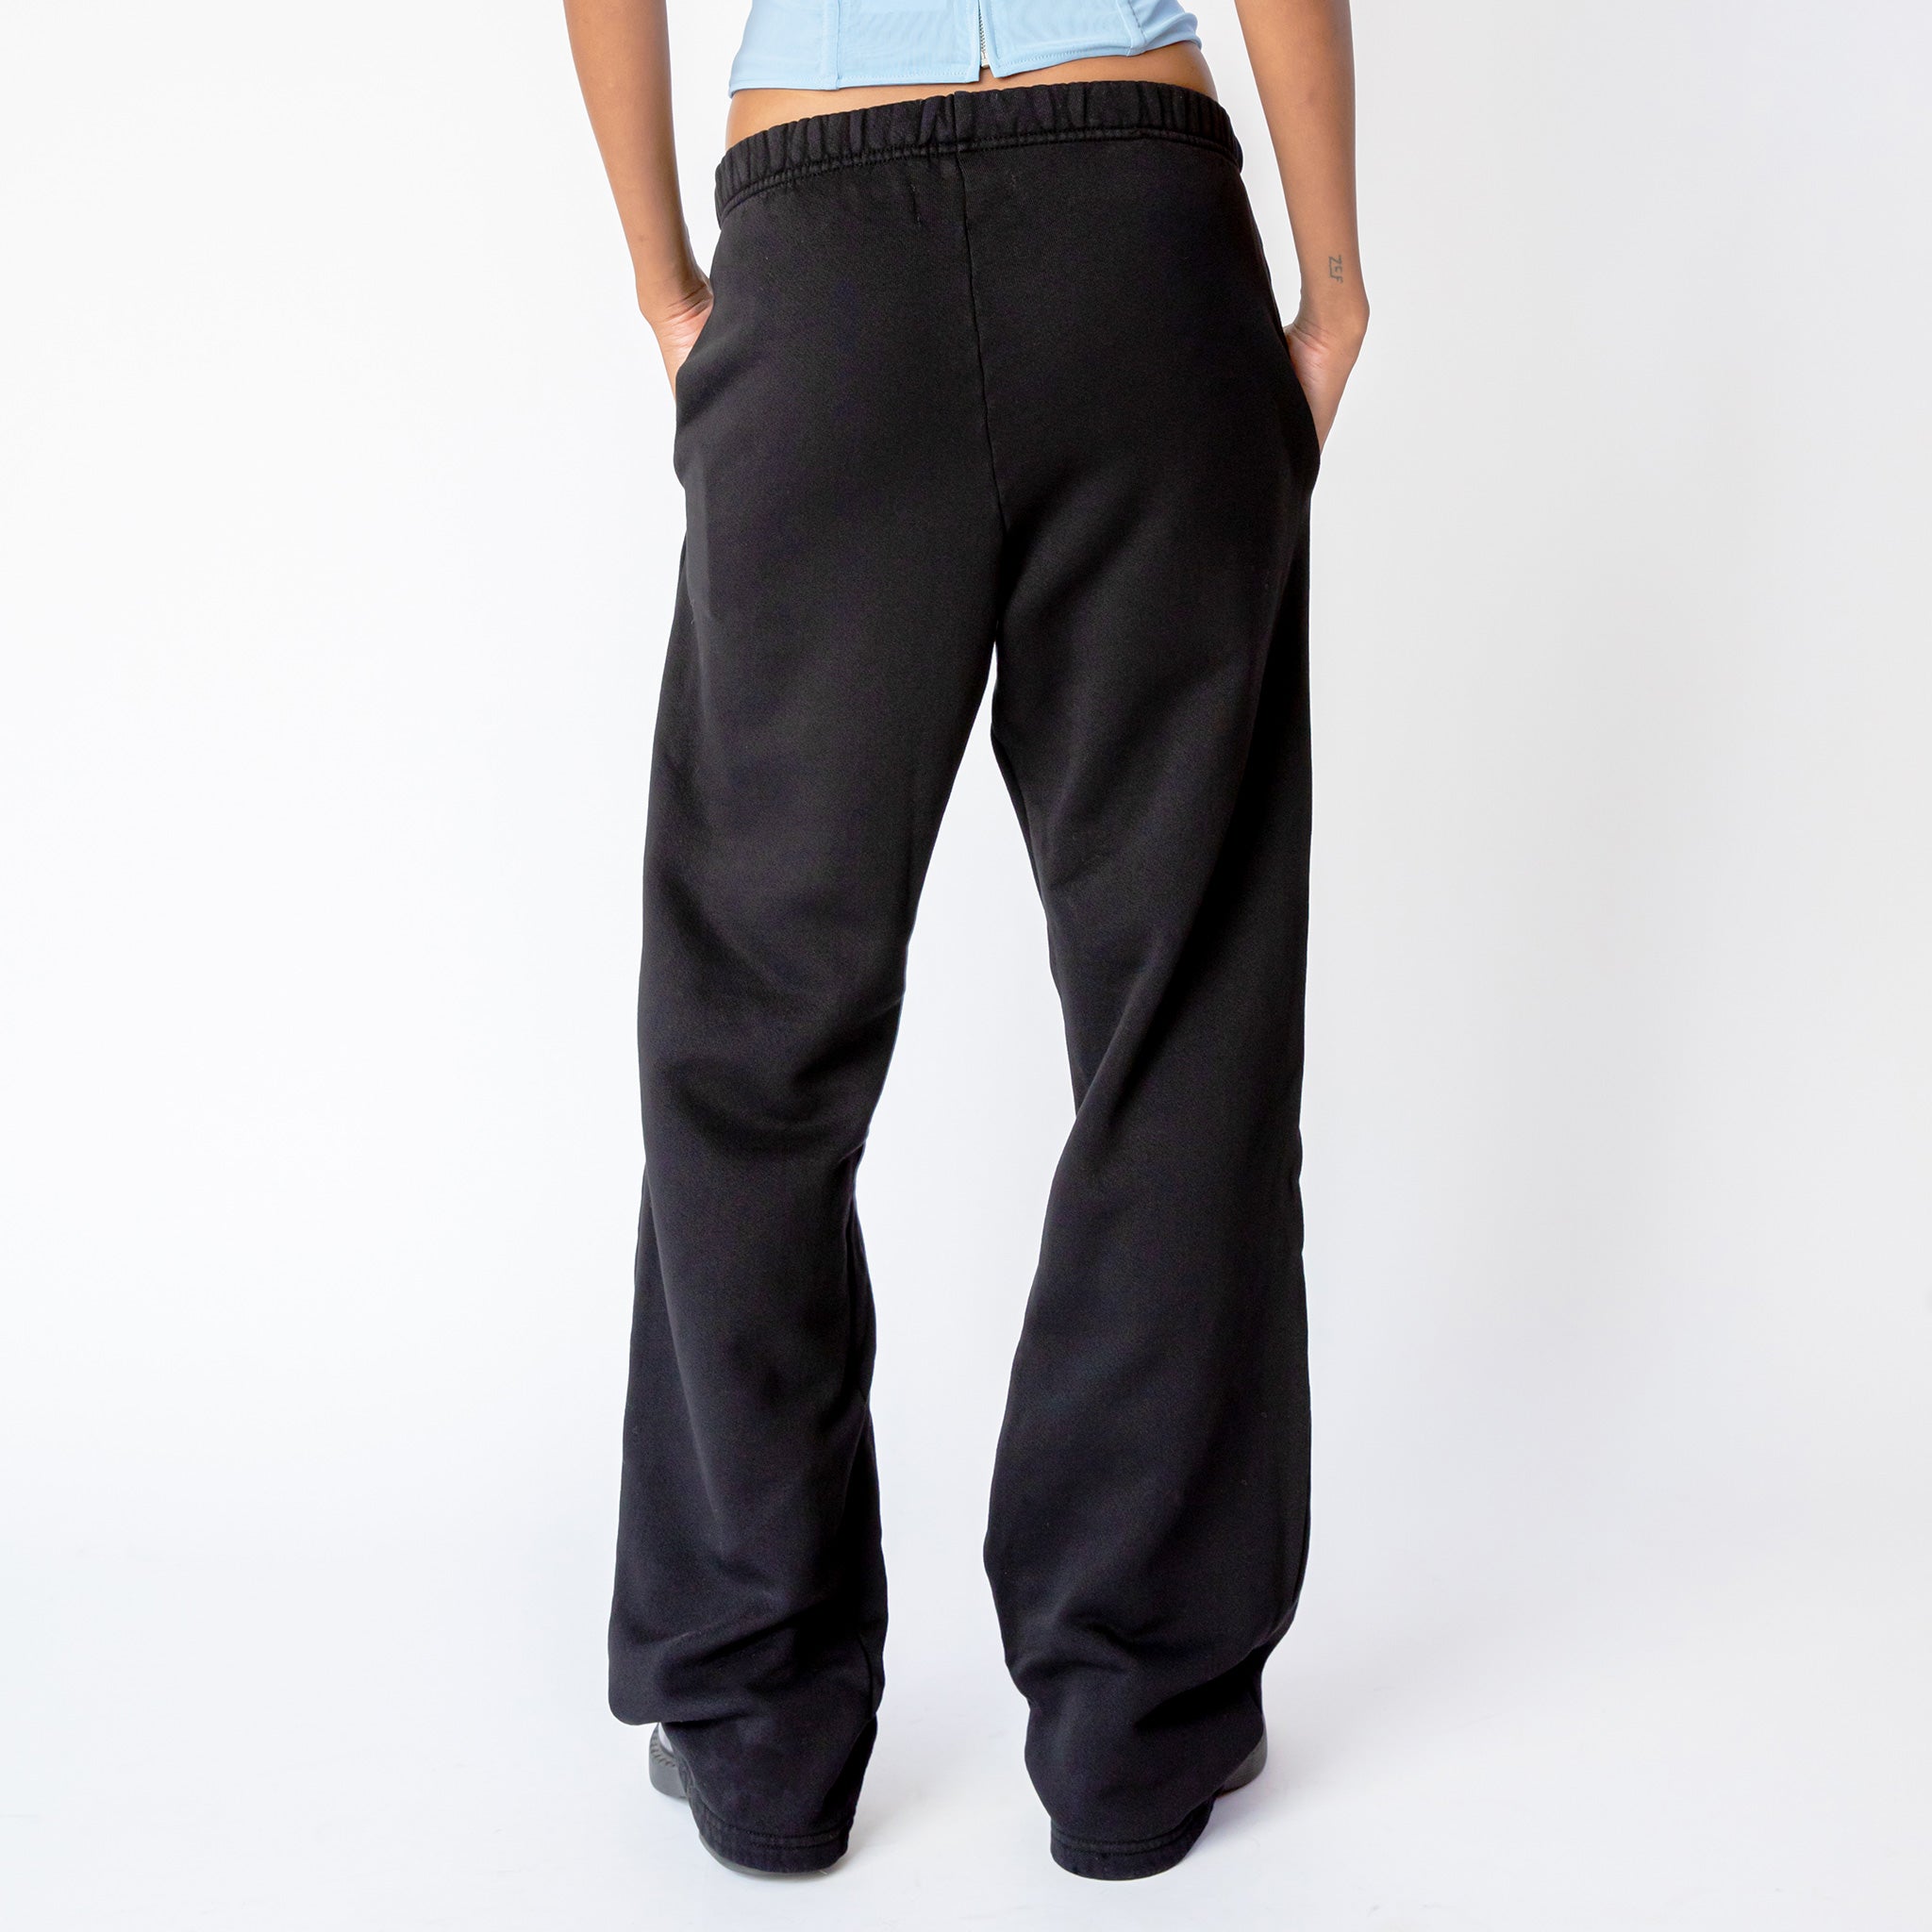 A model wears the Les Tien Puddle Pant in Jet Black, a long, straight-legged sweatpant with extra length that puddles at the feet - back view.